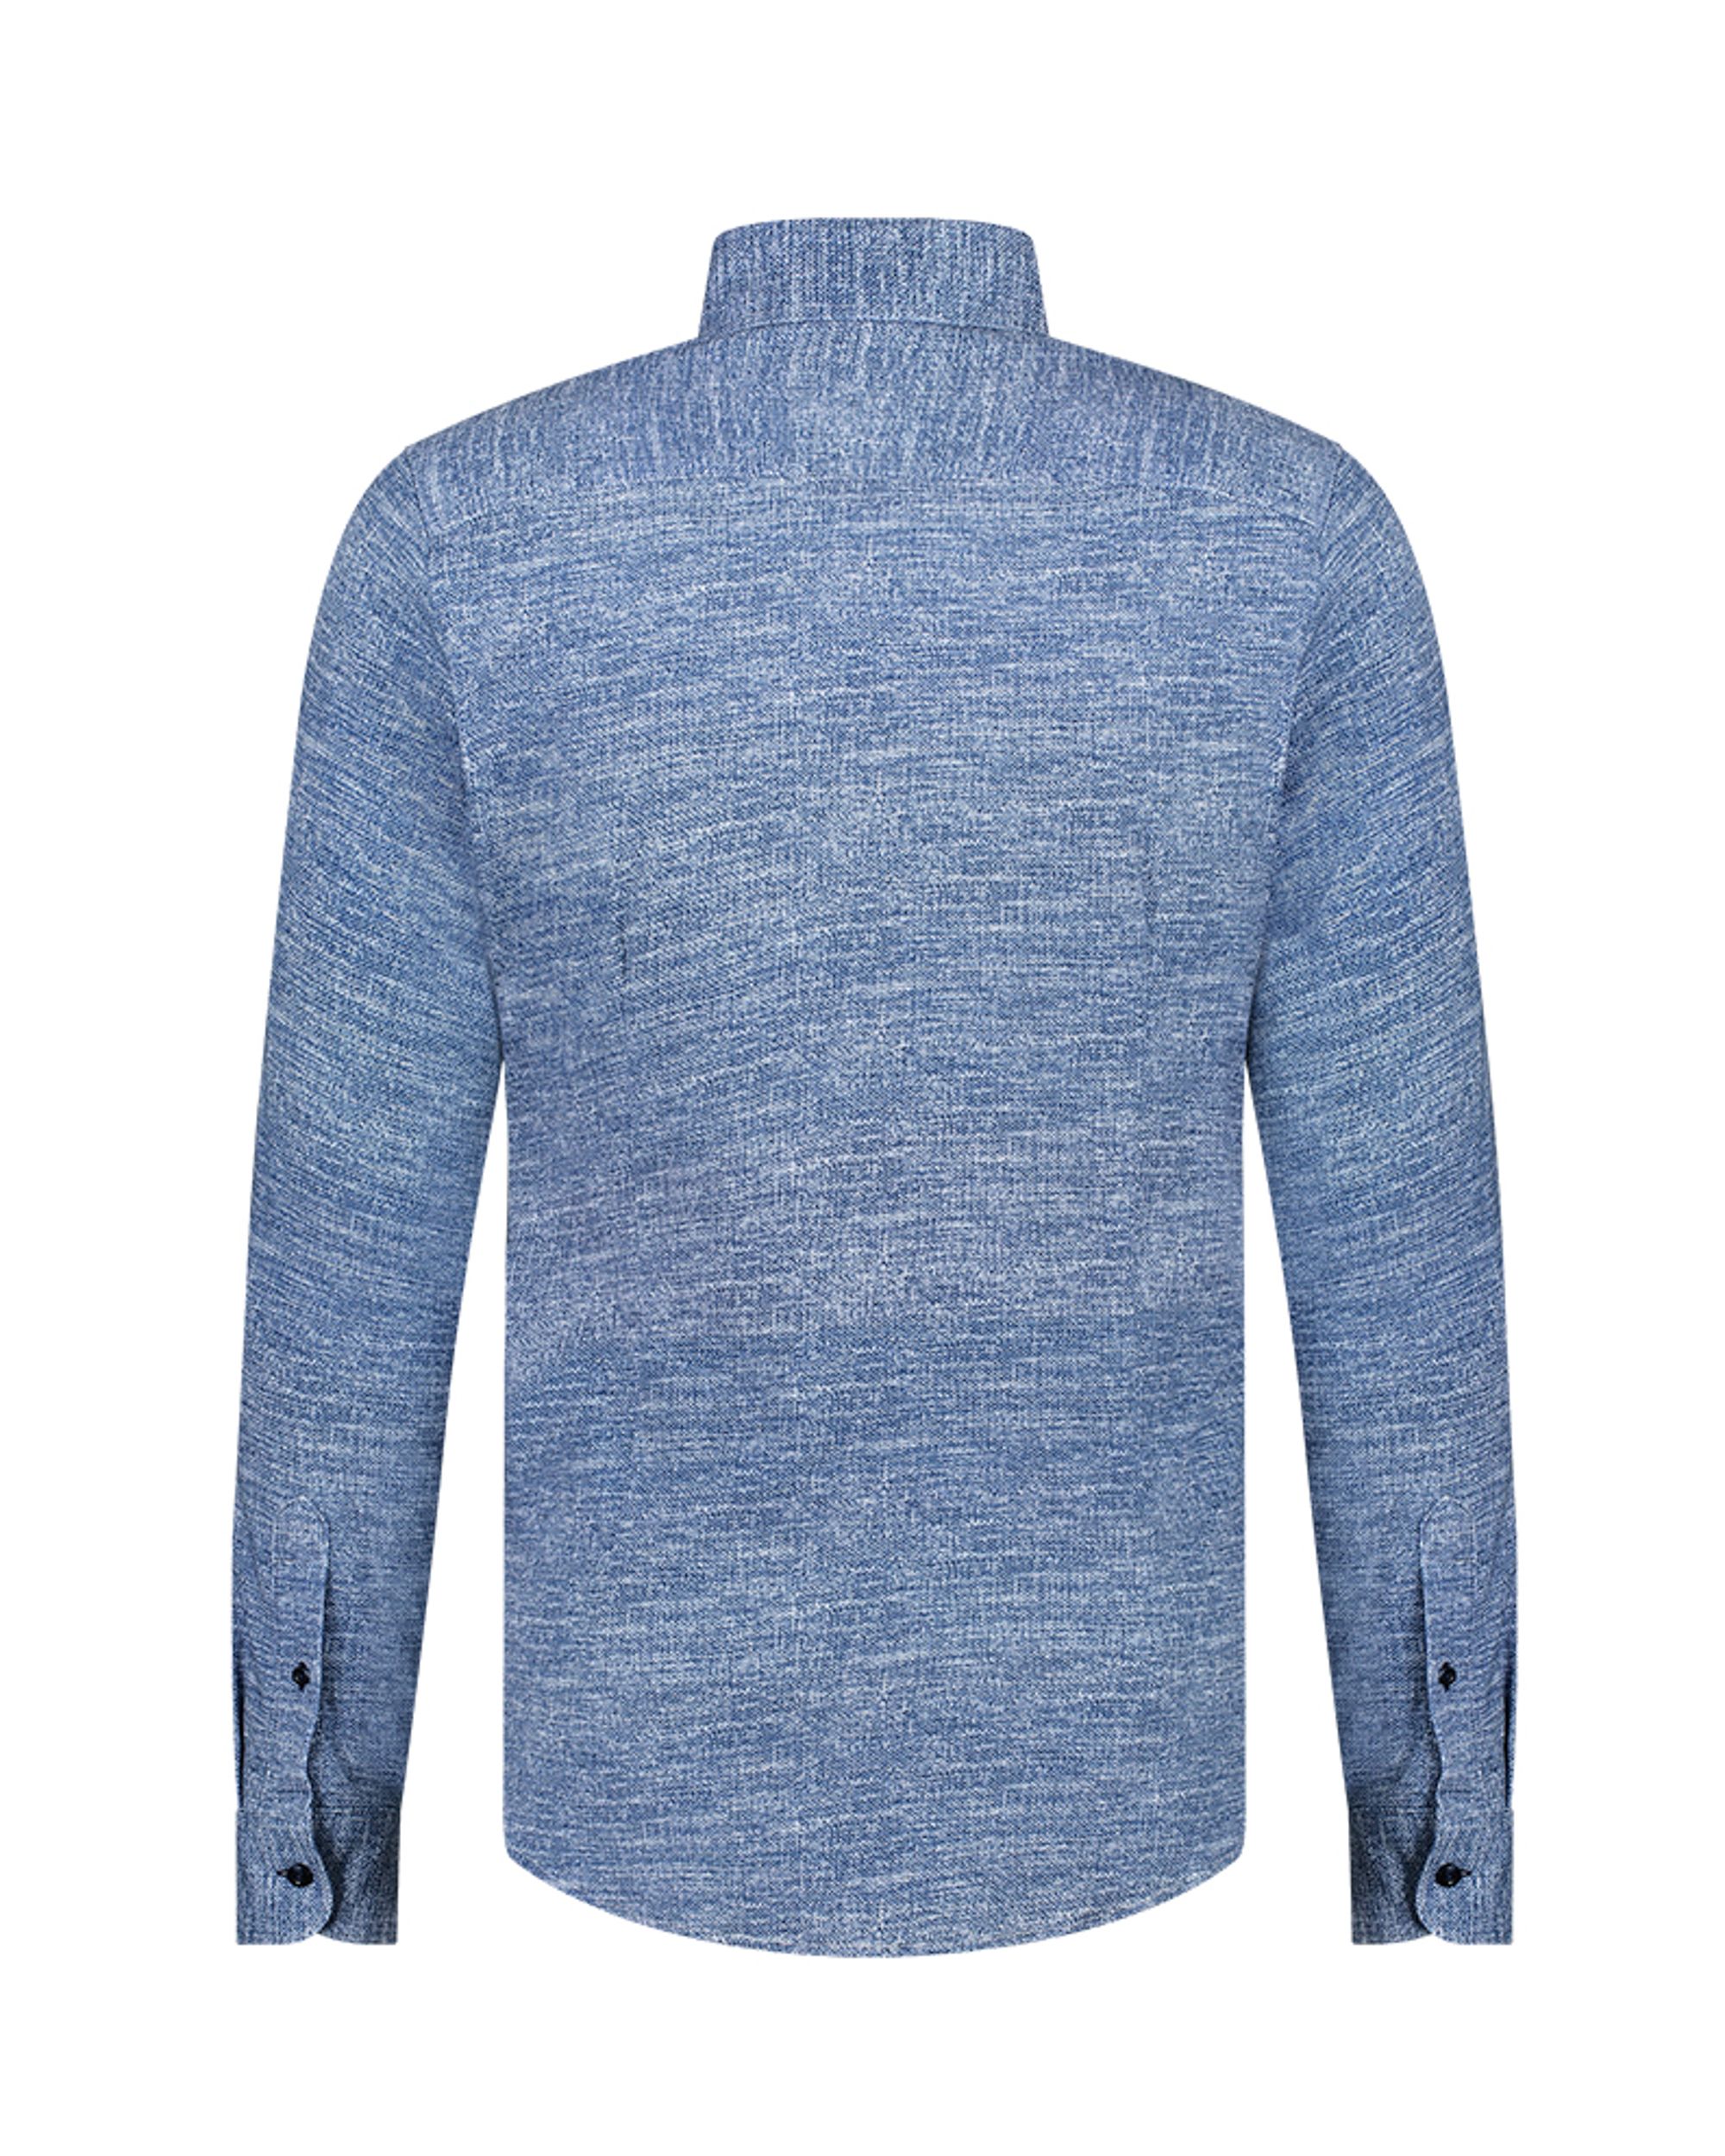 Blue Industry Casual Overhemd LM Blauw 092871-001-37